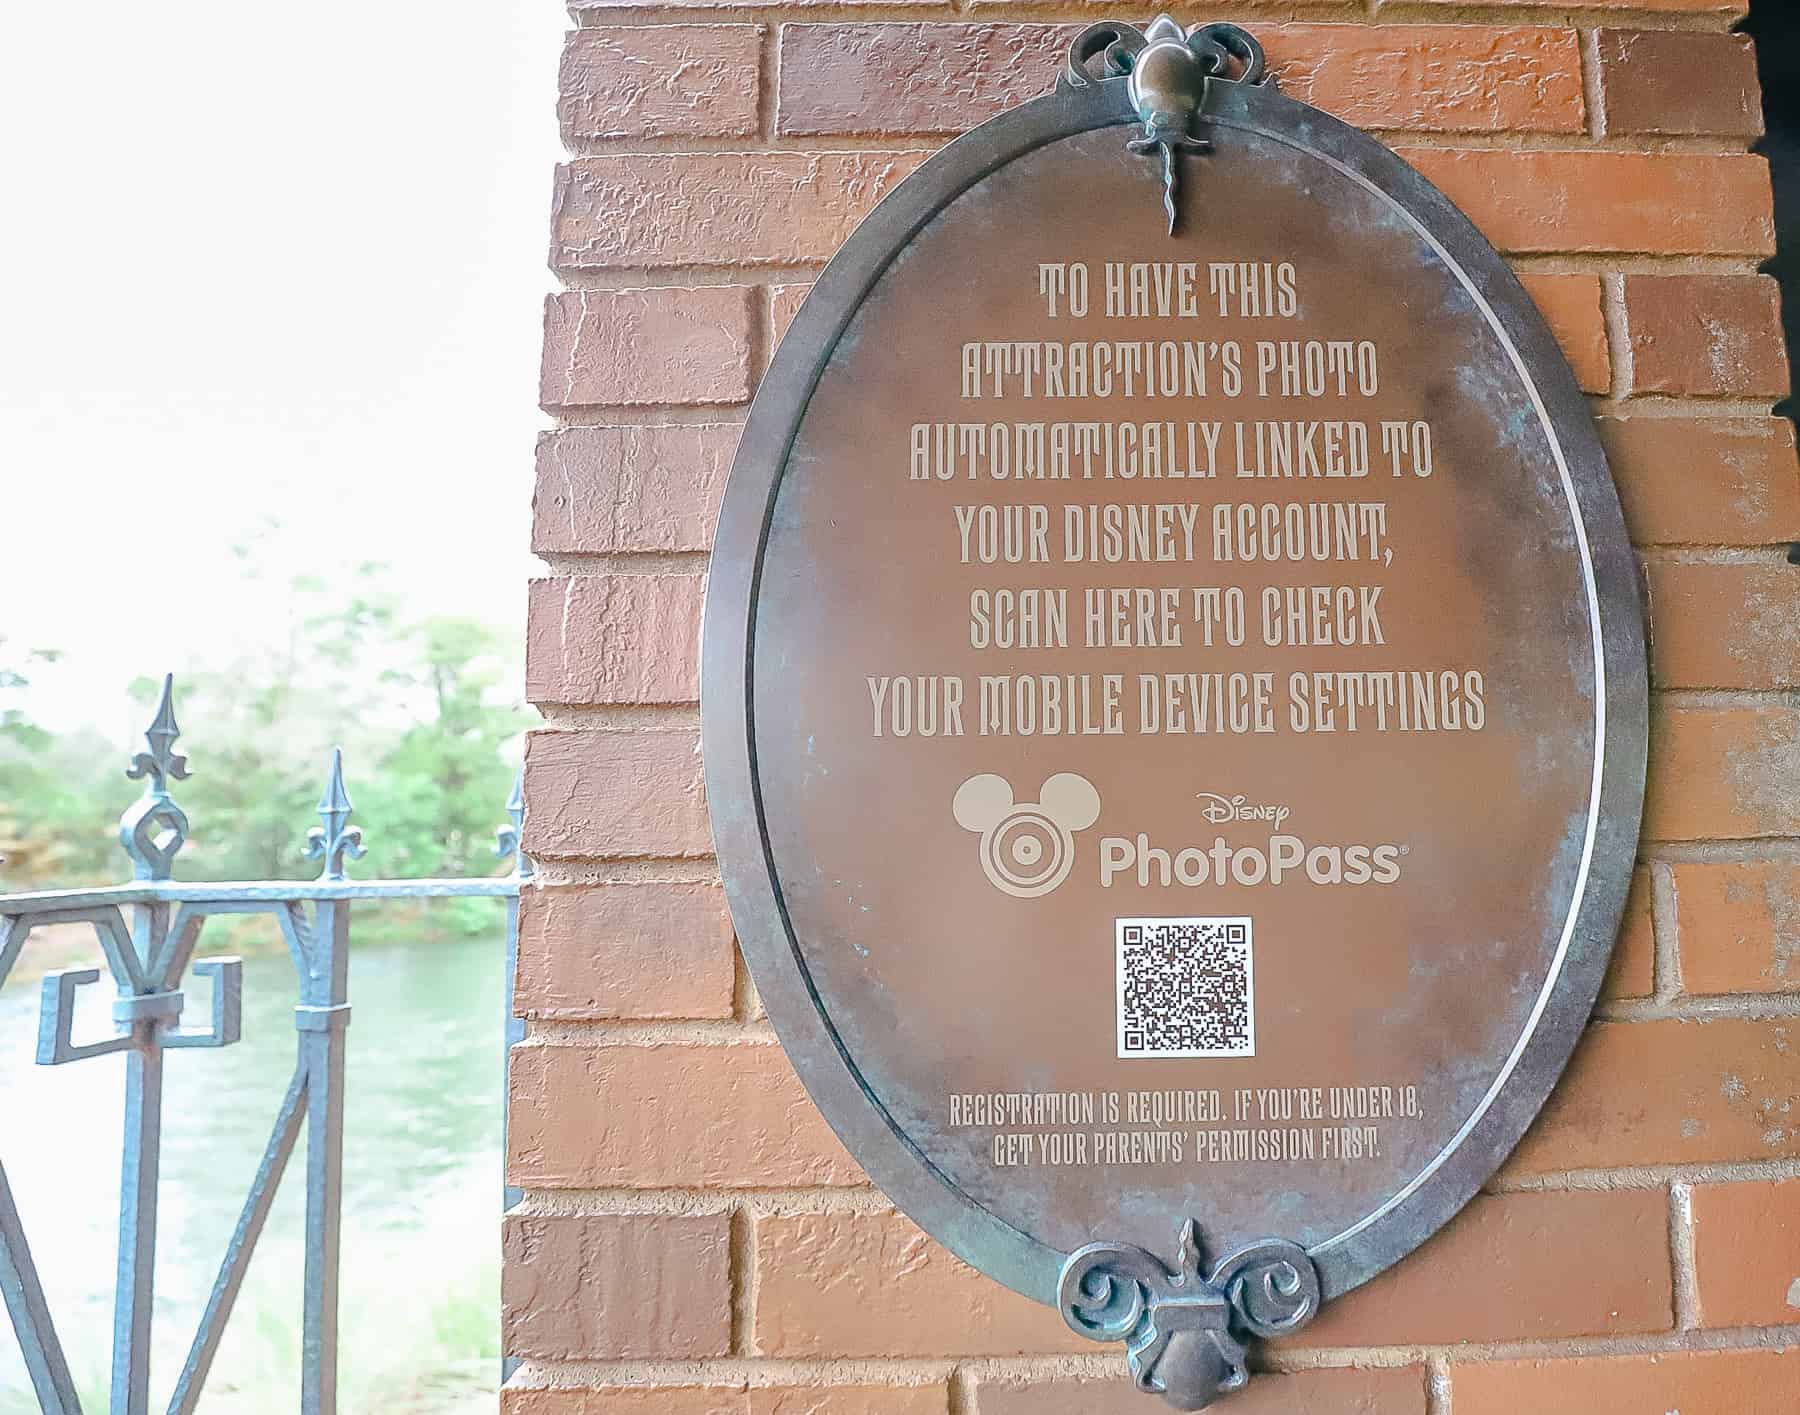 A sign that tells how to link your ride photo to your mobile device. 